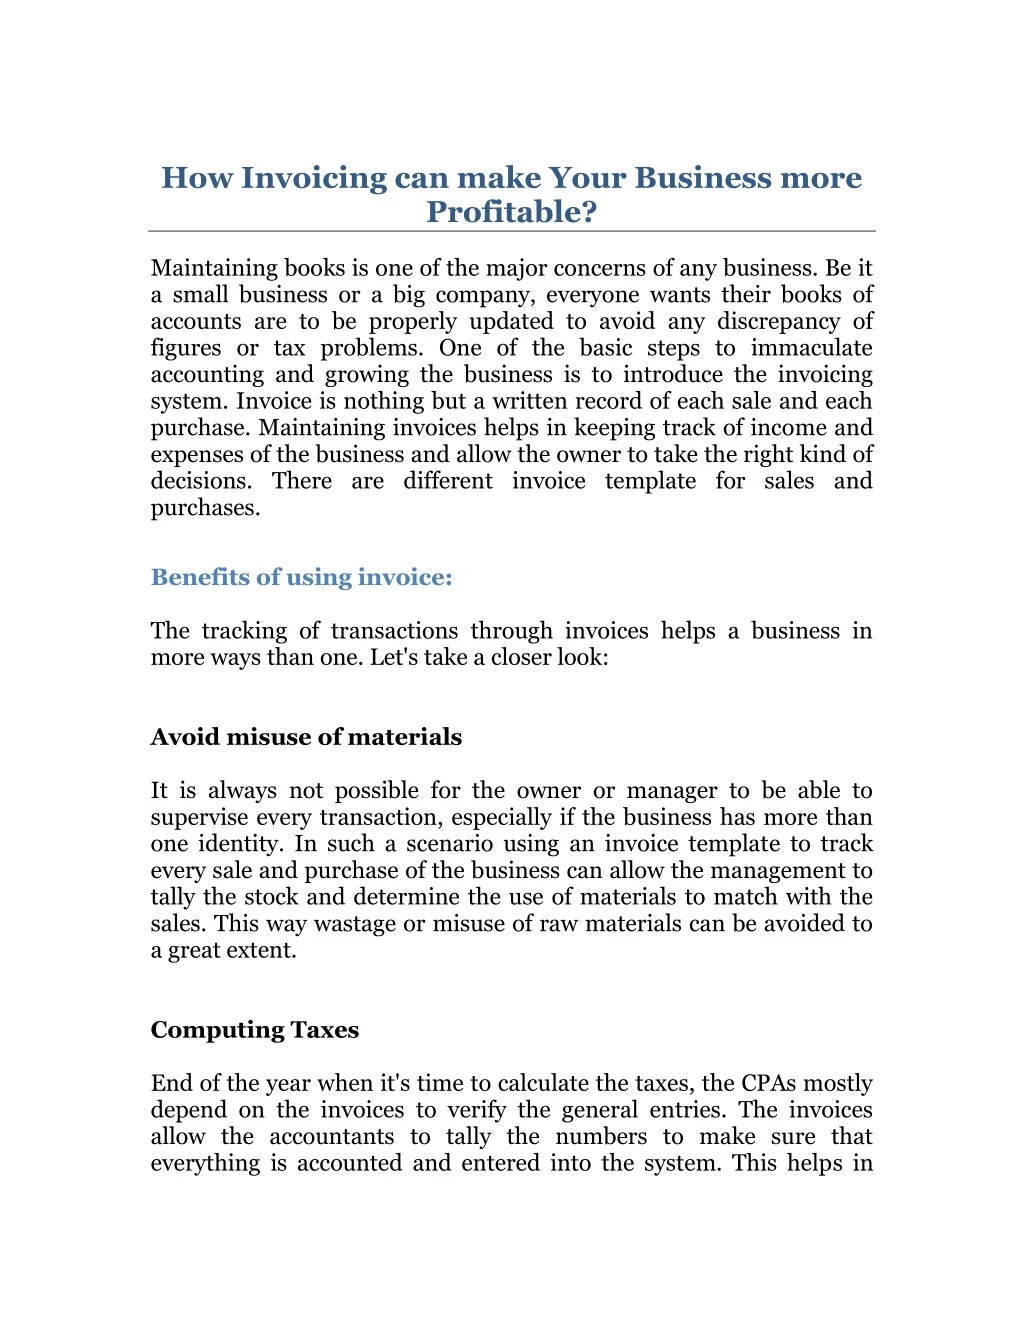 how invoicing can make your business more